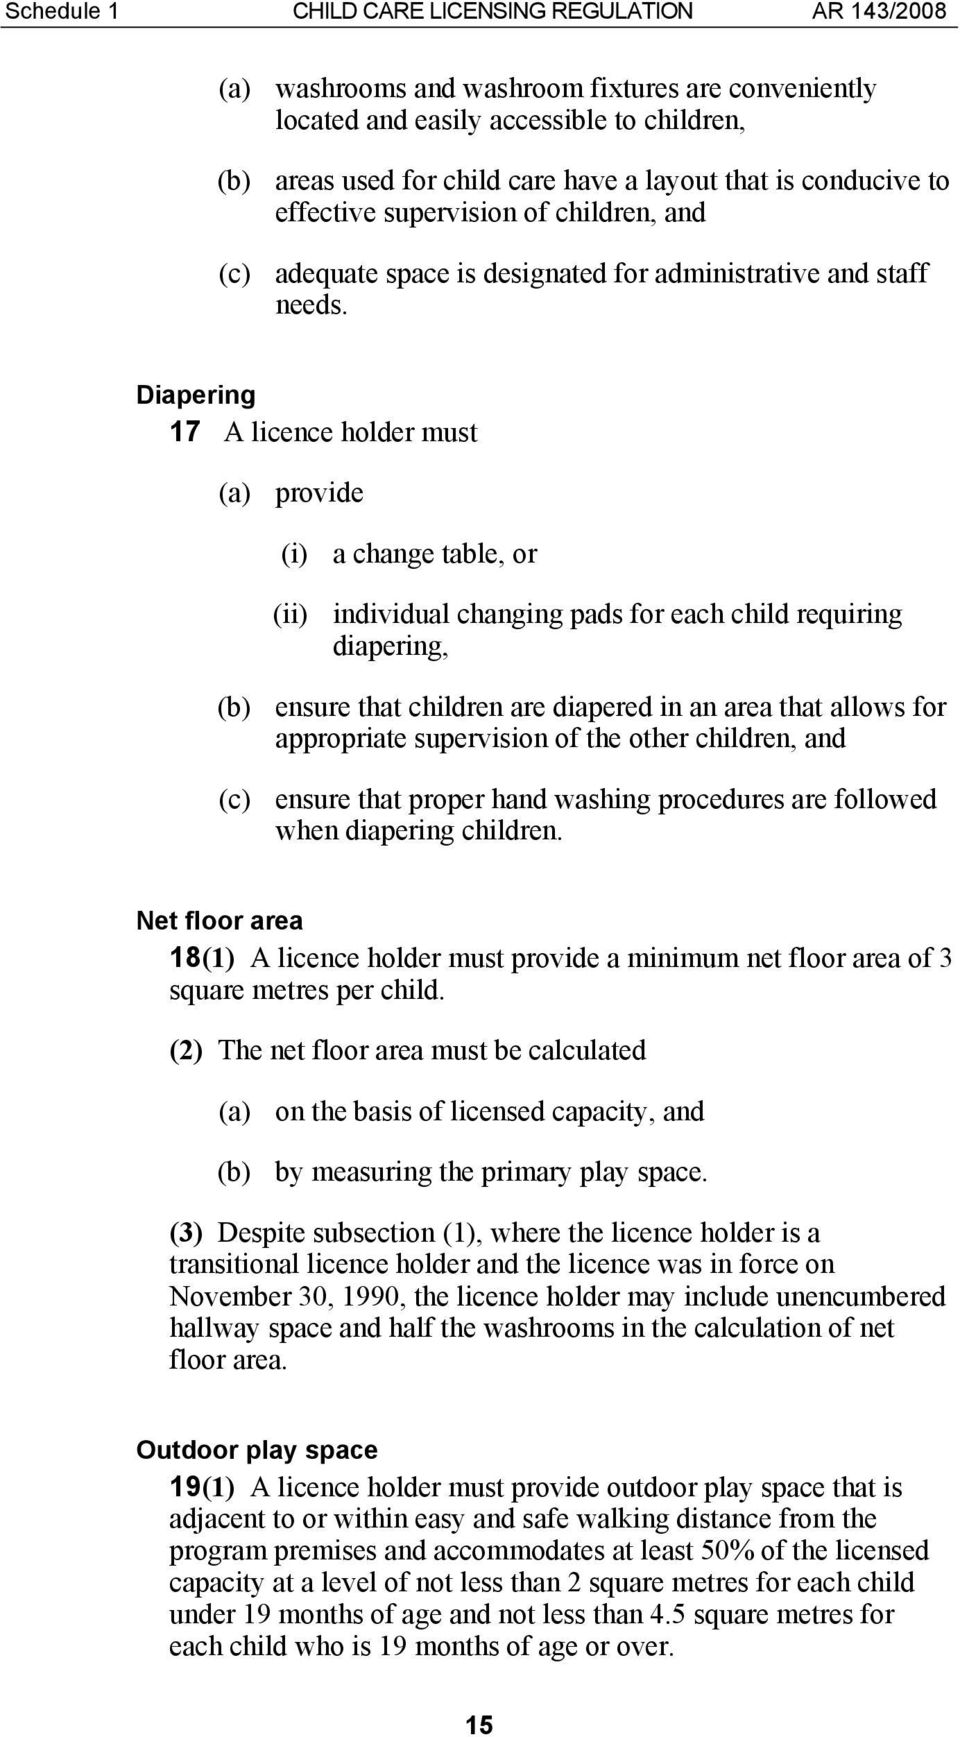 Diapering 17 A licence holder must (a) provide (i) a change table, or (ii) individual changing pads for each child requiring diapering, (b) ensure that children are diapered in an area that allows